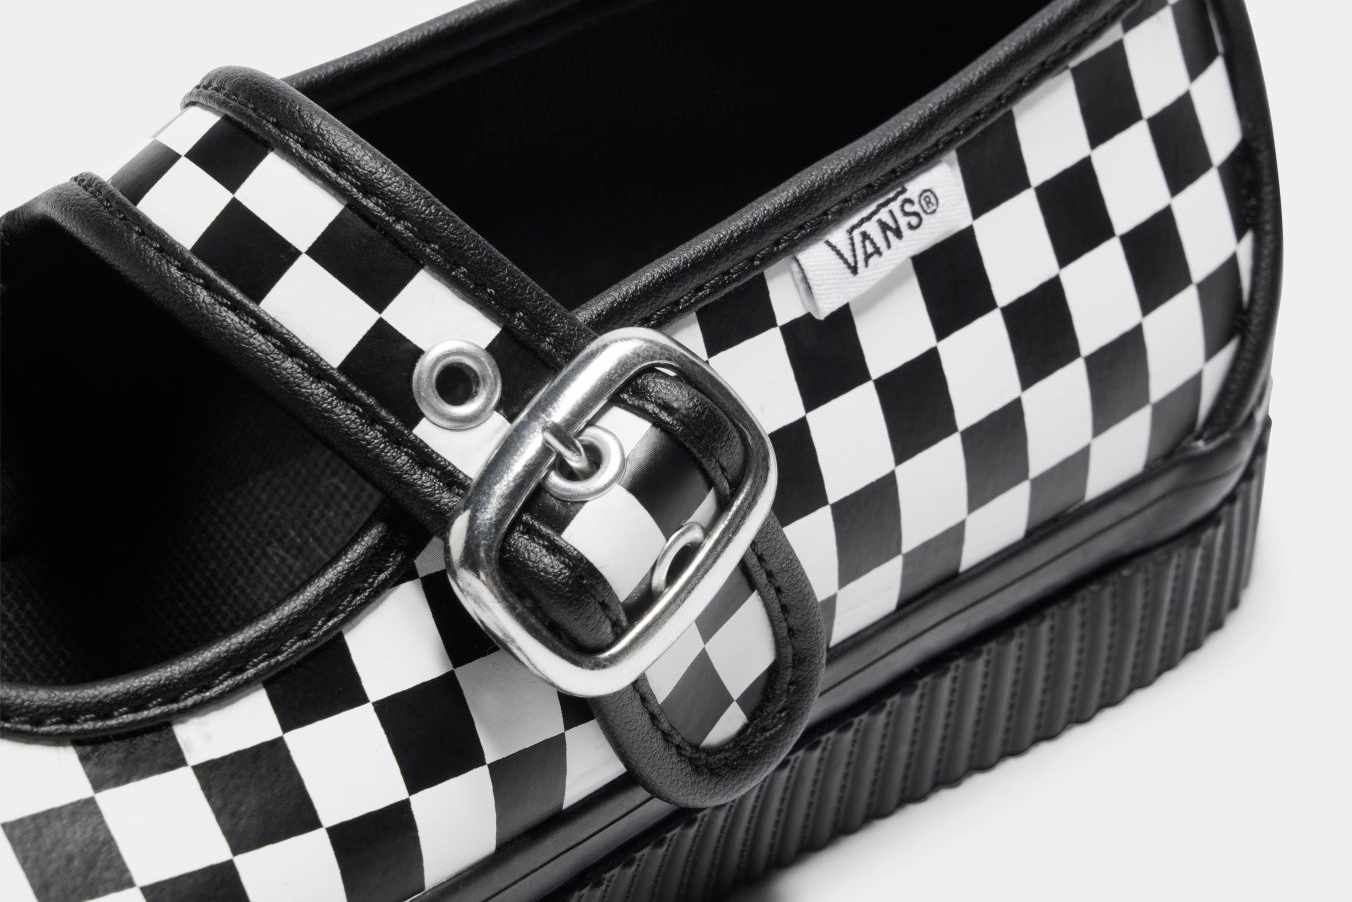 Vans' checkerboard mary jane style 93 skate sneaker with a black leather lining and silver buckle